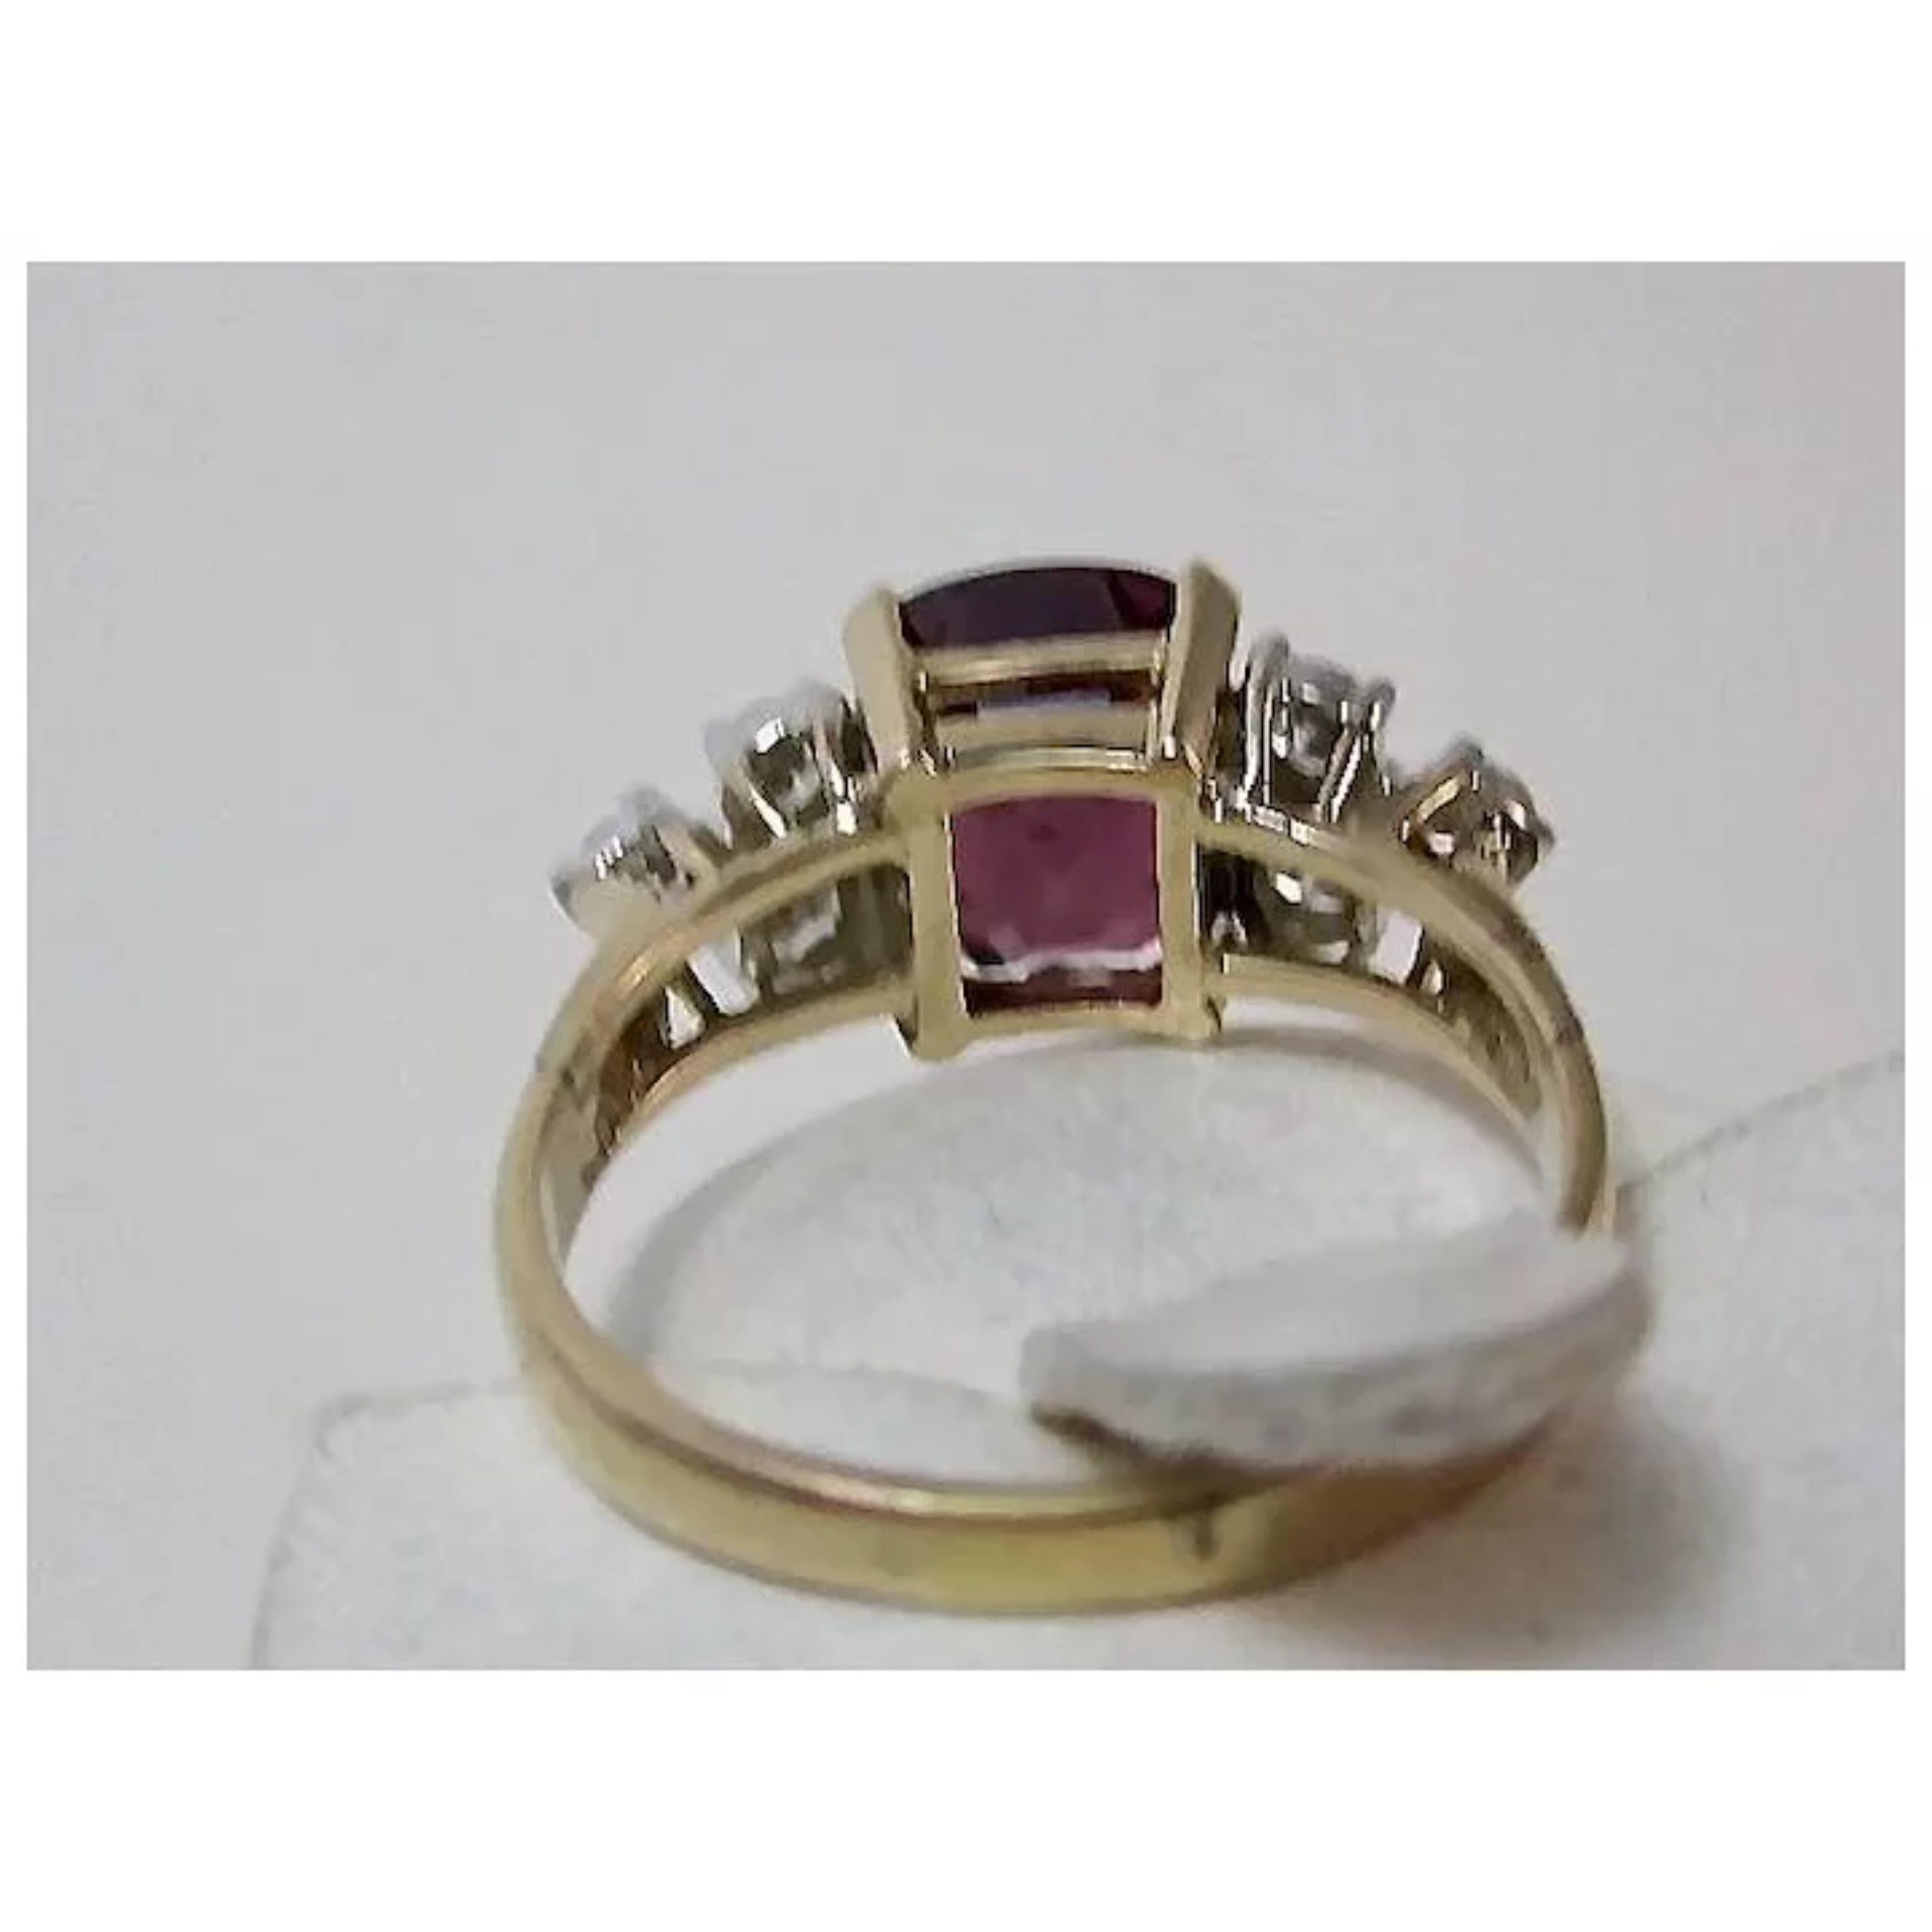 For Sale:  2 Carat Cushion Cut Ruby Diamond Engagement Ring, Ruby Diamond Cocktail Ring 4